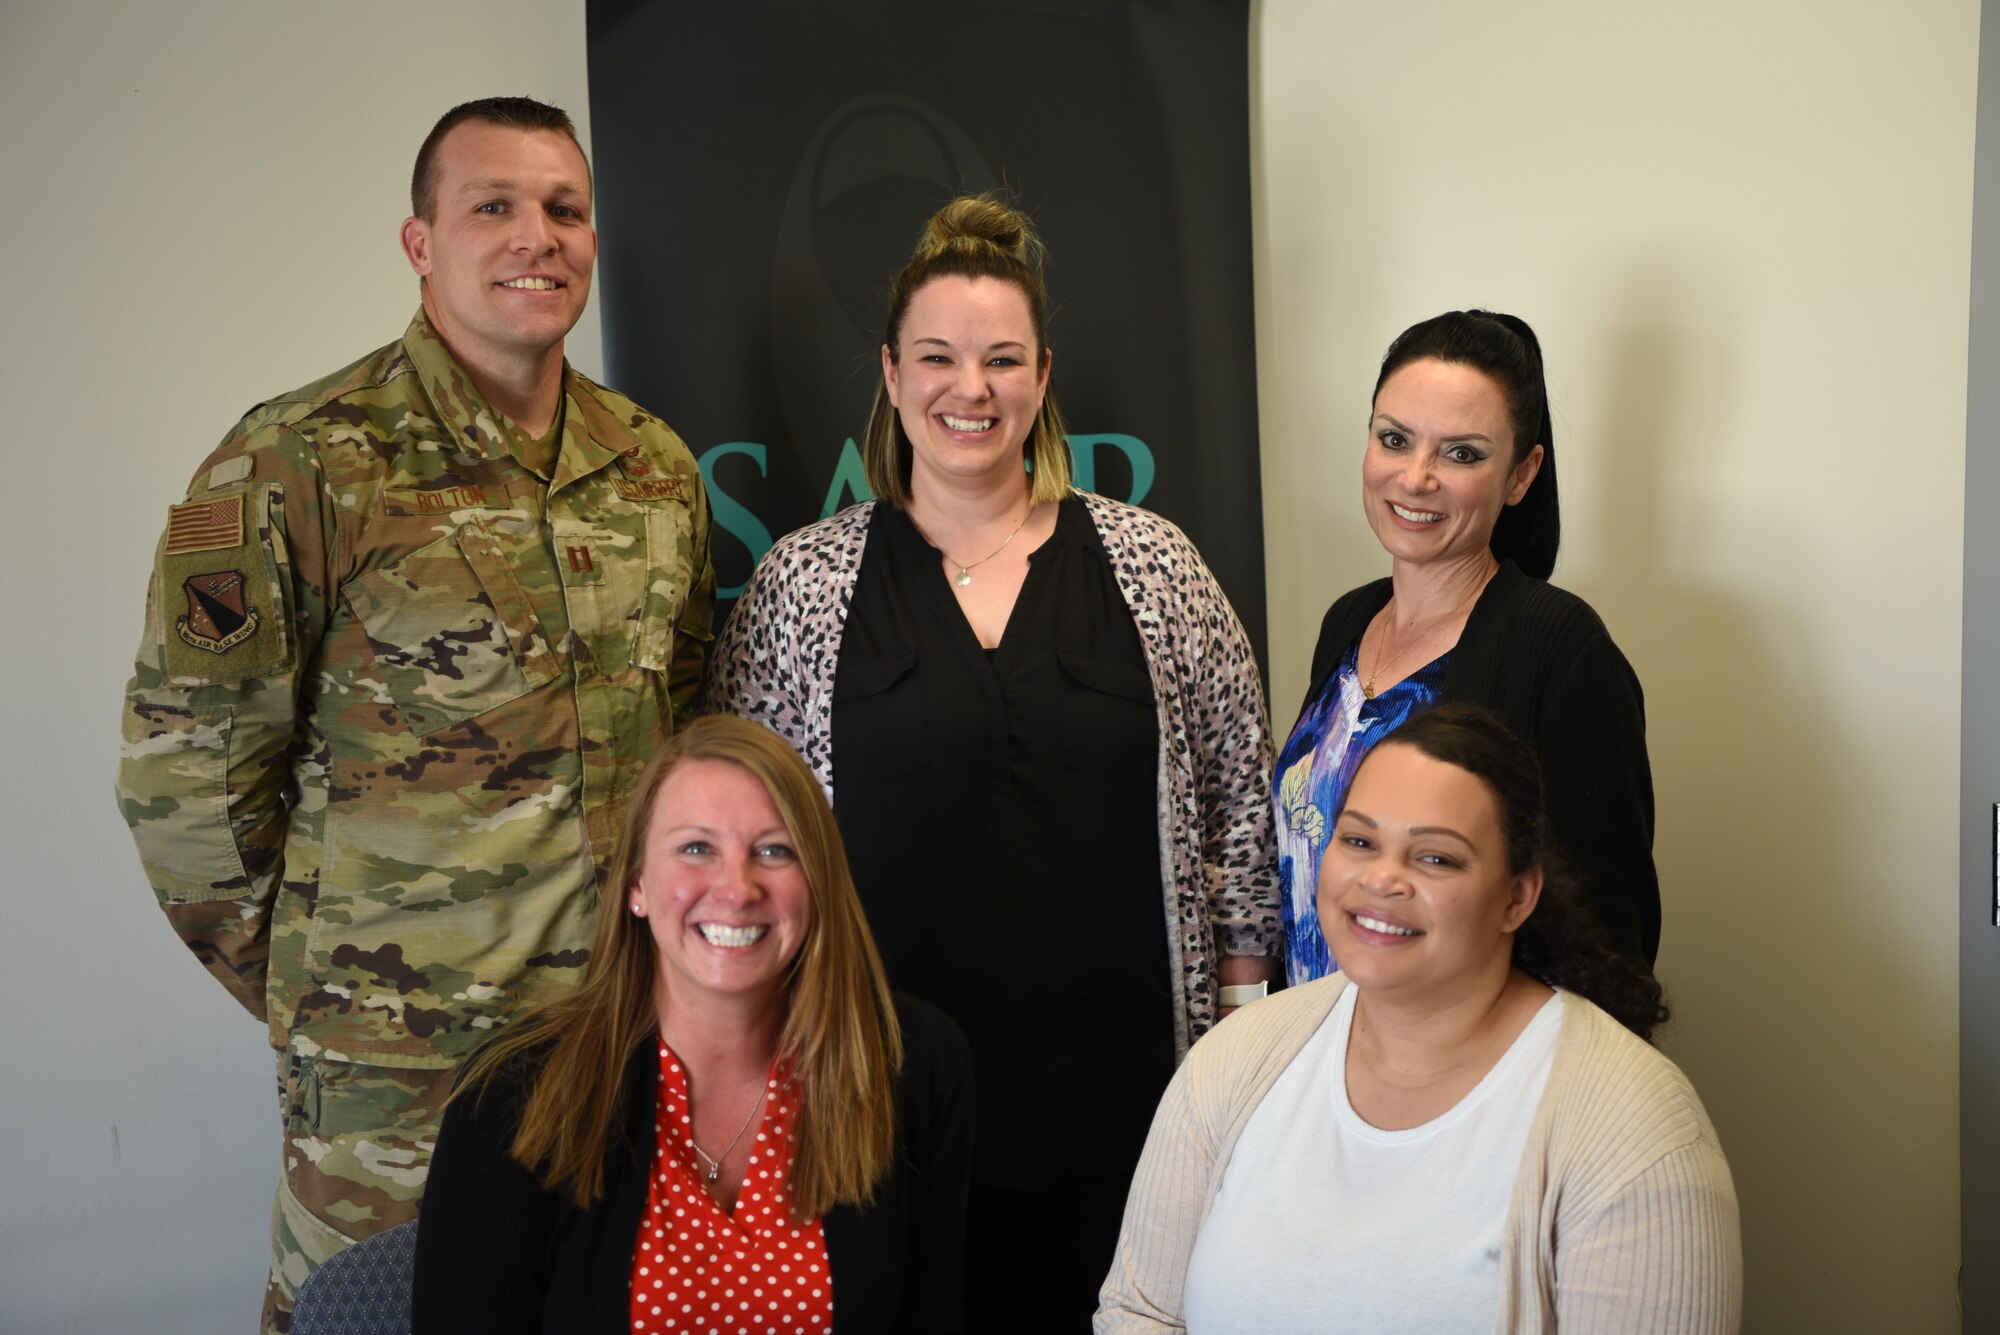 Wright-Patterson Air Force Base Sexual Assault Prevention and Response team
members Capt. William Bolton (left), April Barrows, Annamae Willis, Kelly Hebert and Jazmyn
Turner pose for a photo in their office May 12. The team won the 2021 Department of the Air
Force Exceptional SAPR Team award for their effective and dedicated care for Wright-Patt
Airmen. (U.S. Air Force photo by Airman 1st Class Jack Gardner)